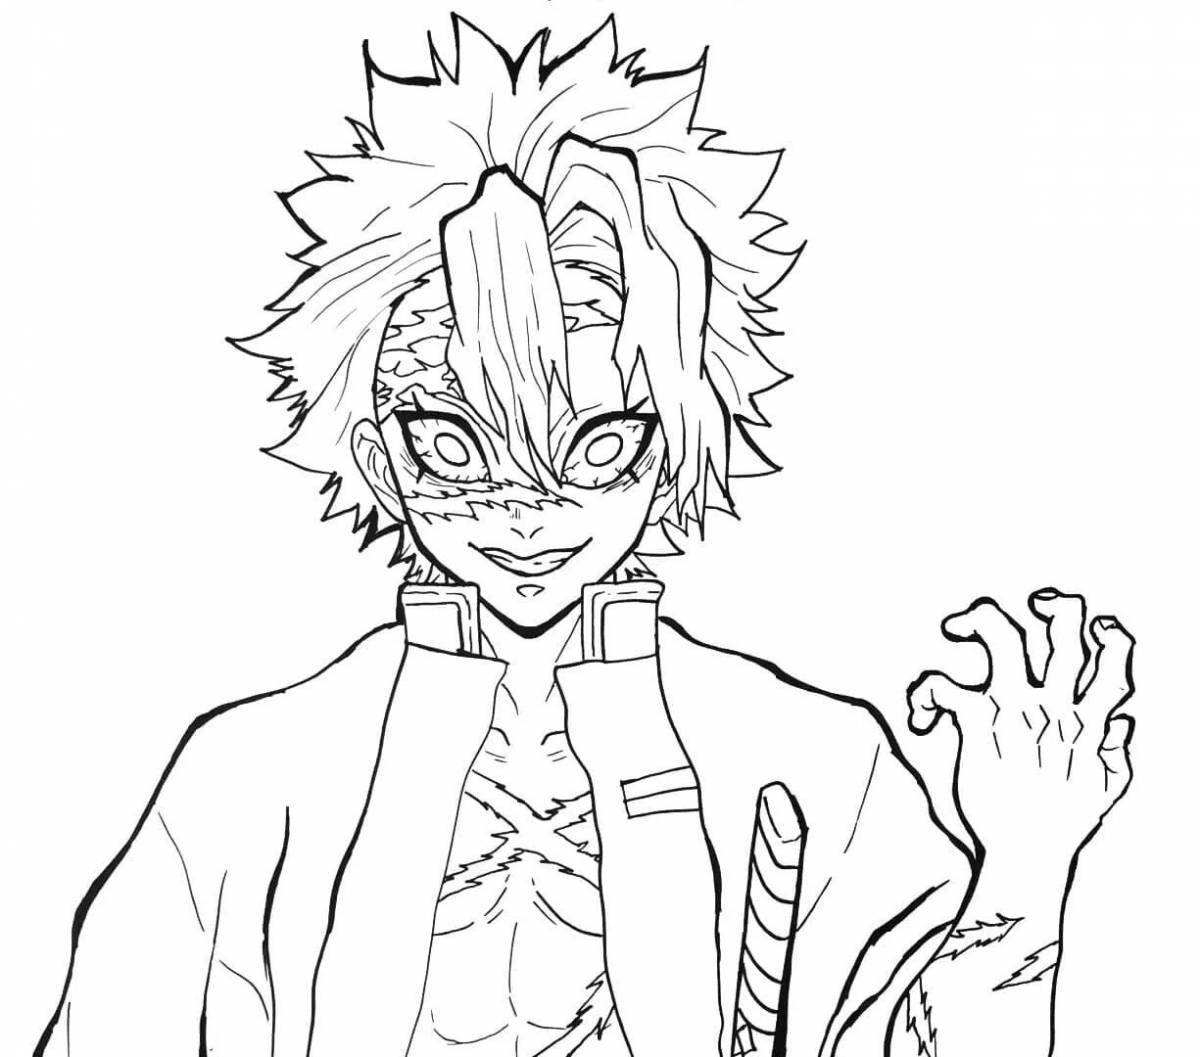 Charming demon slayer coloring page